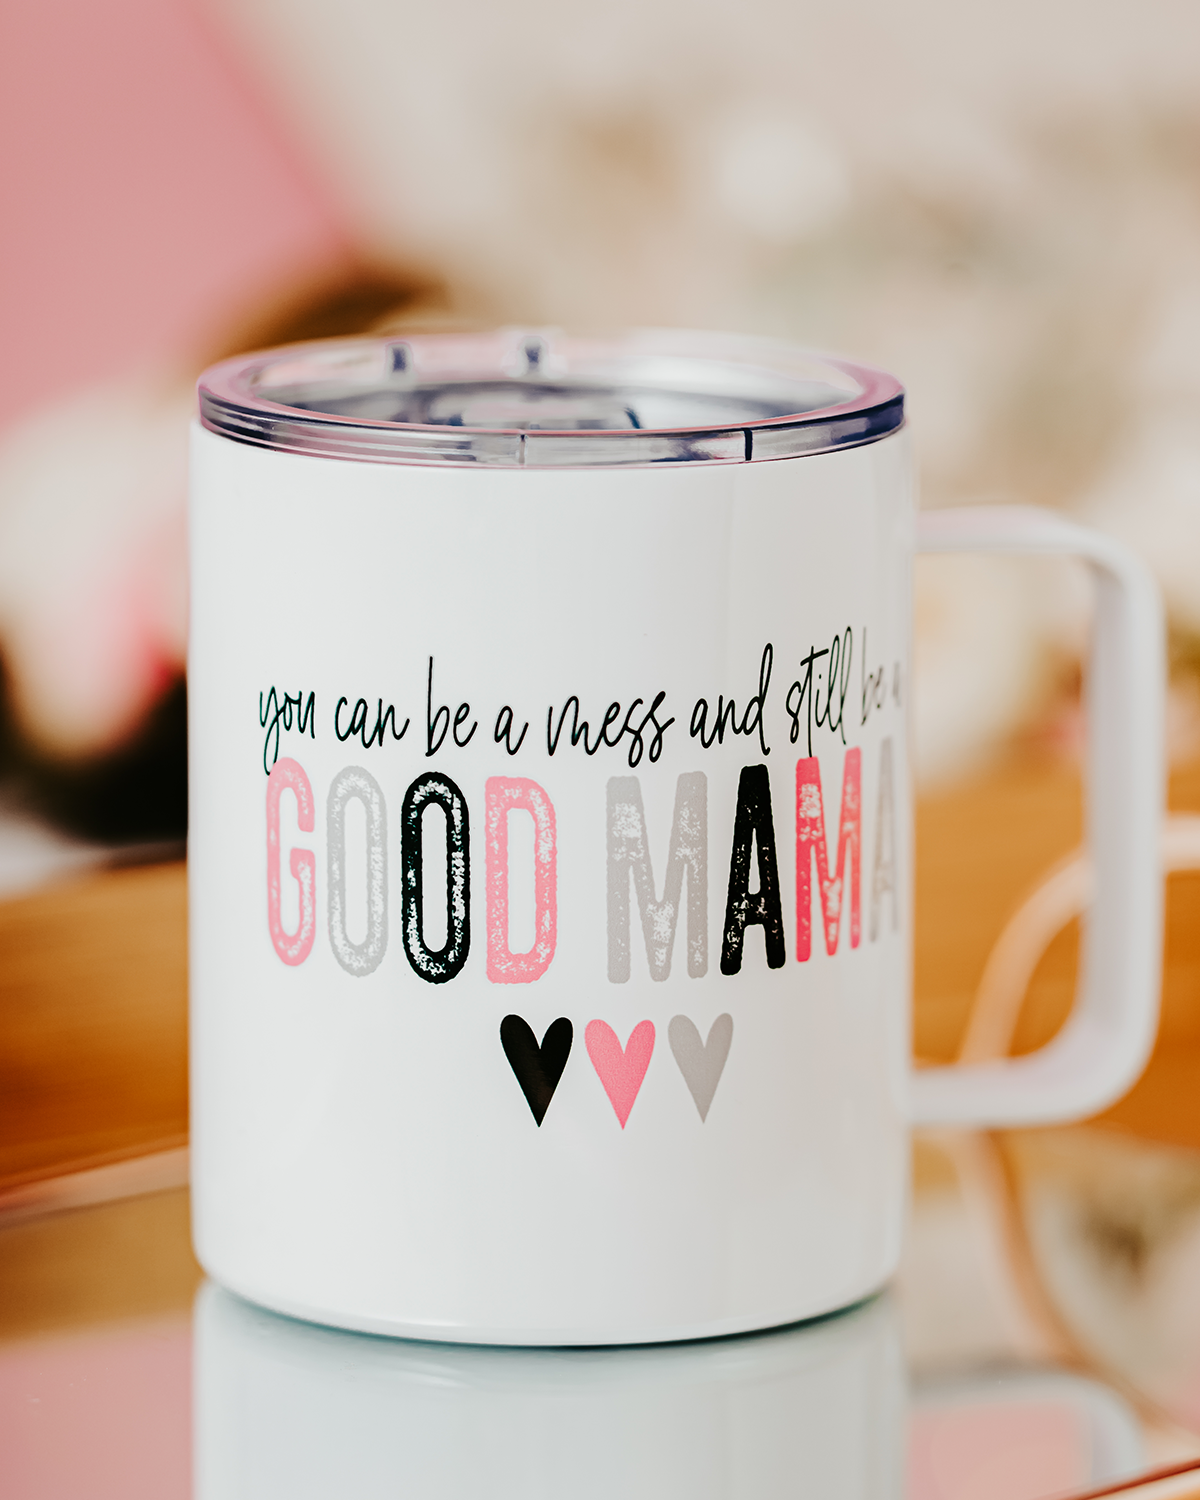 Music Mama Mug with Yellow Accents - Omaha Conservatory of Music